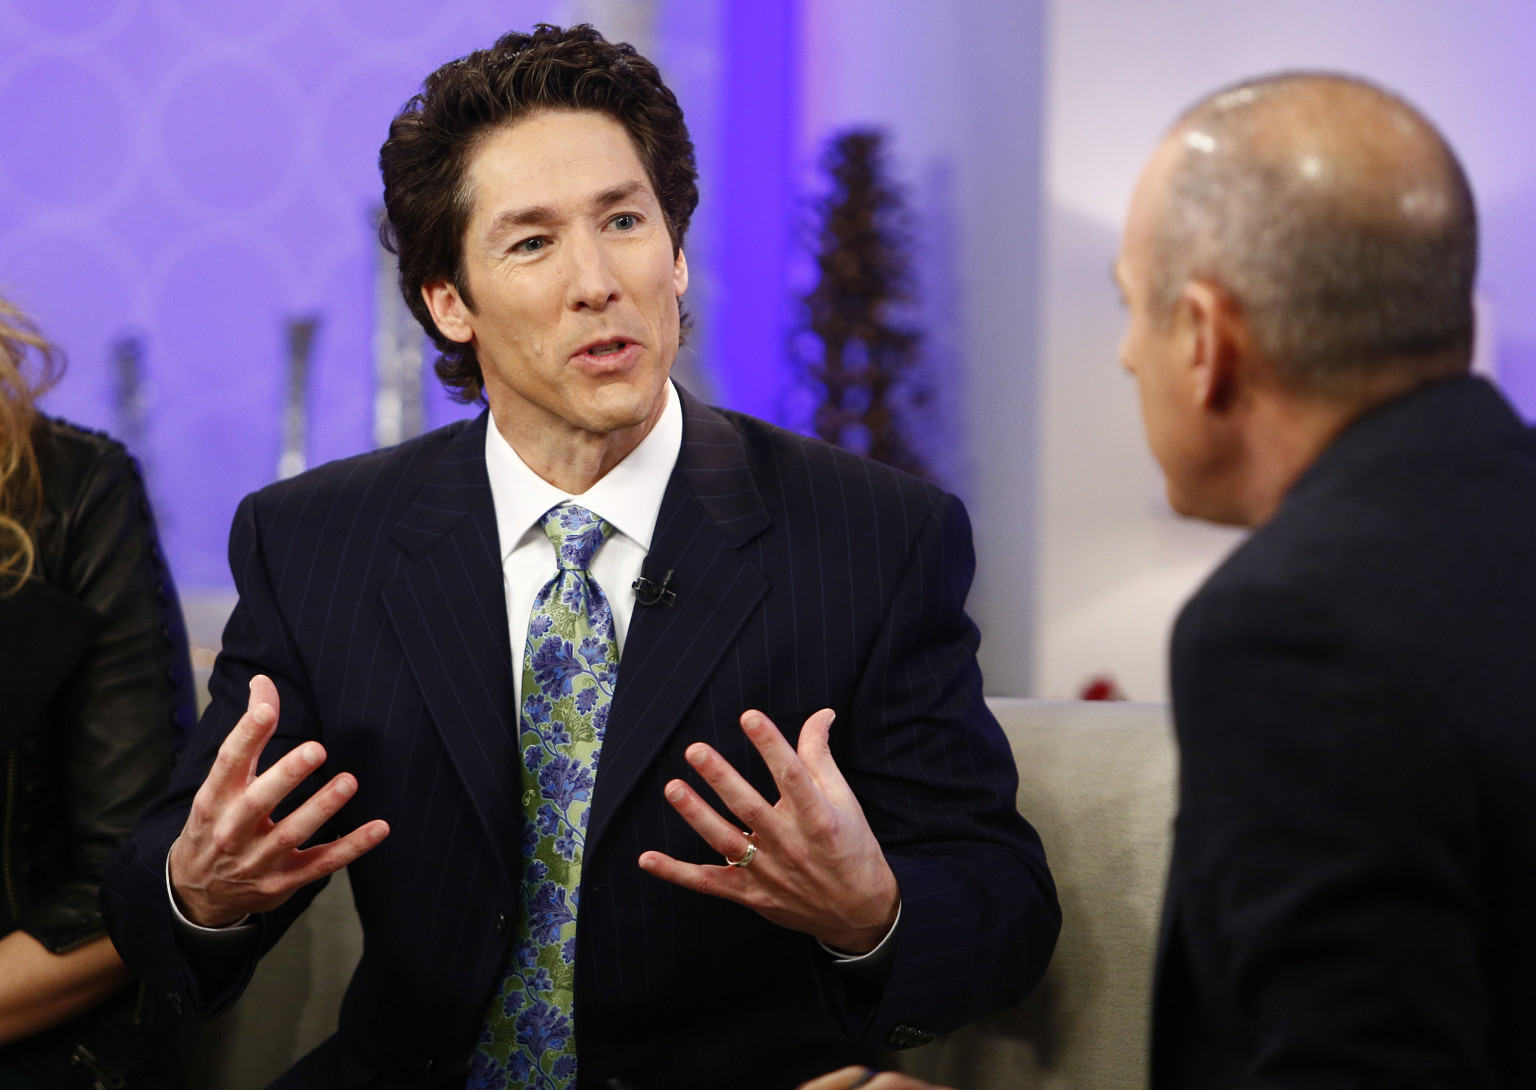 Joel Osteen Speaks Out About Hurricane Harvey Controversy says church has opened doors to flood victims